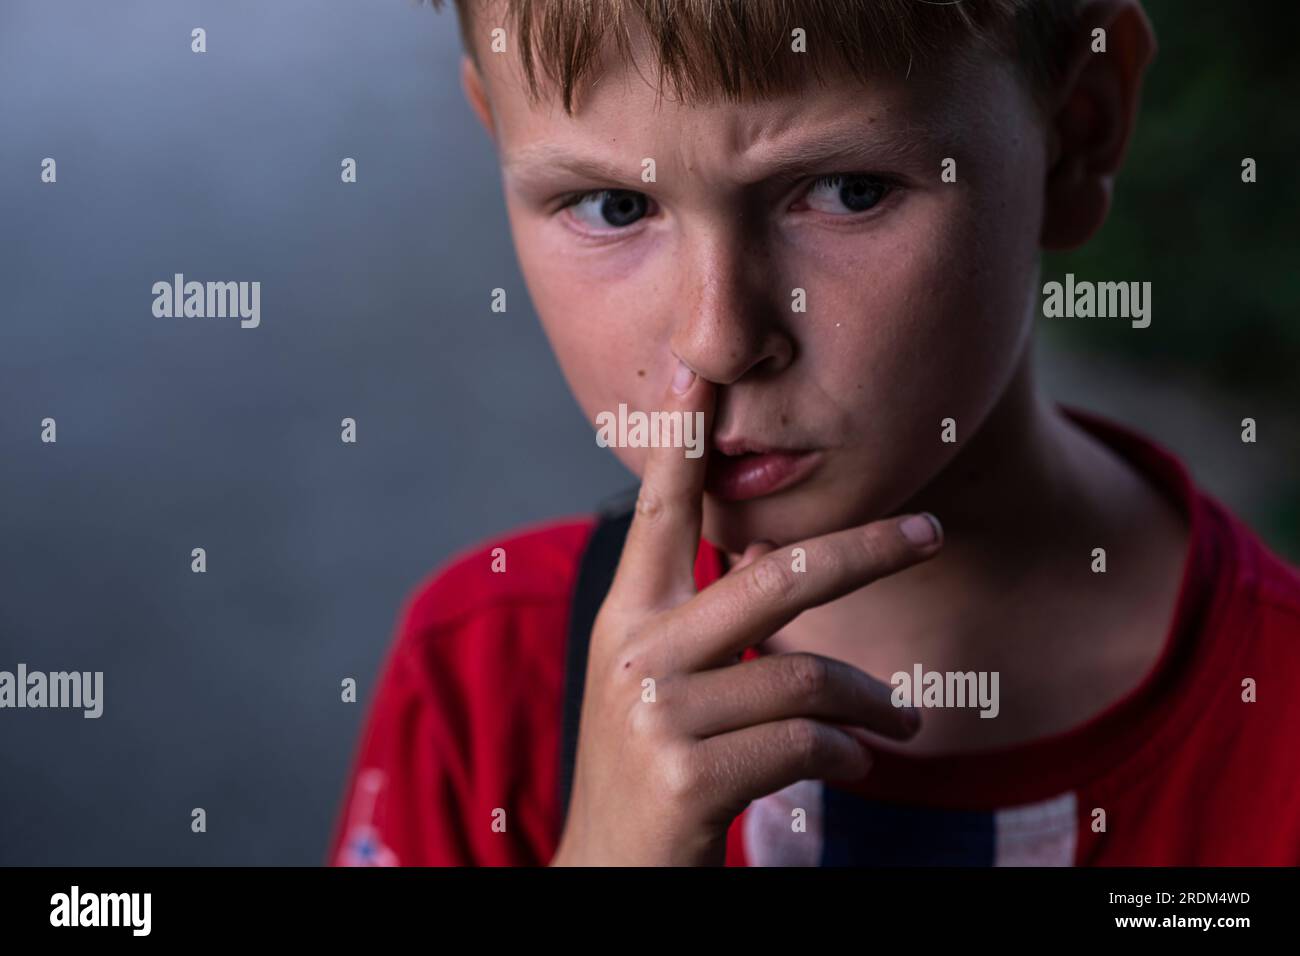 Portrait of a boy picking his nose. Thoughtful boy furrows his brows. Stock Photo